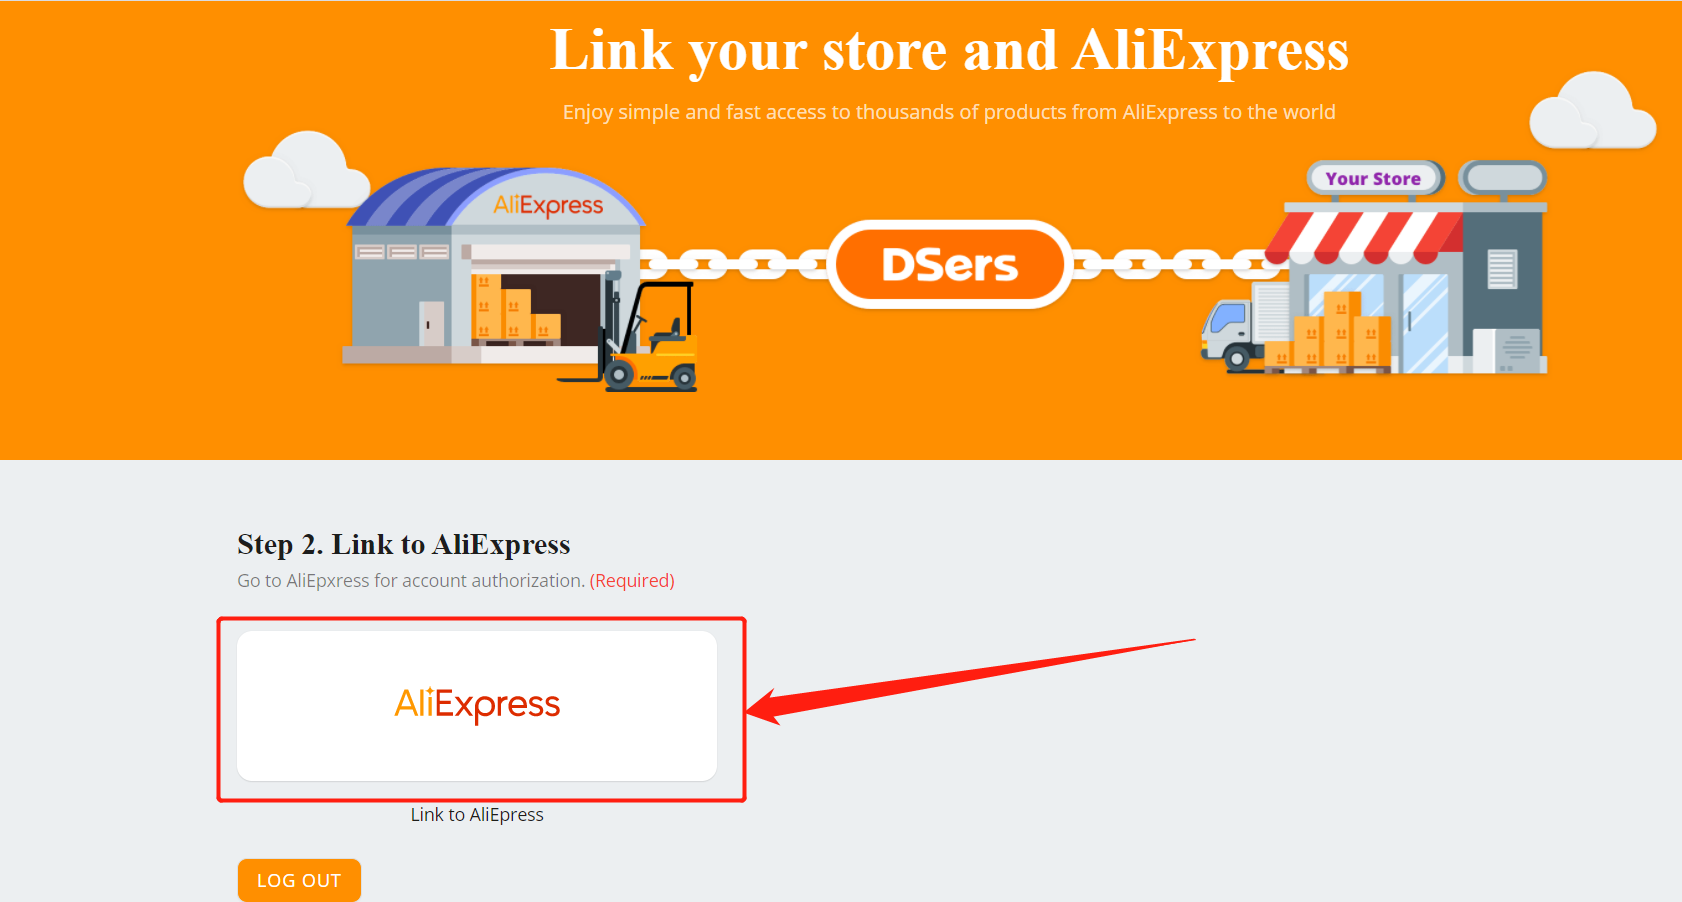 Disconnect AliExpress account with Woo DSers - Link to AliExpres - Woo DSers